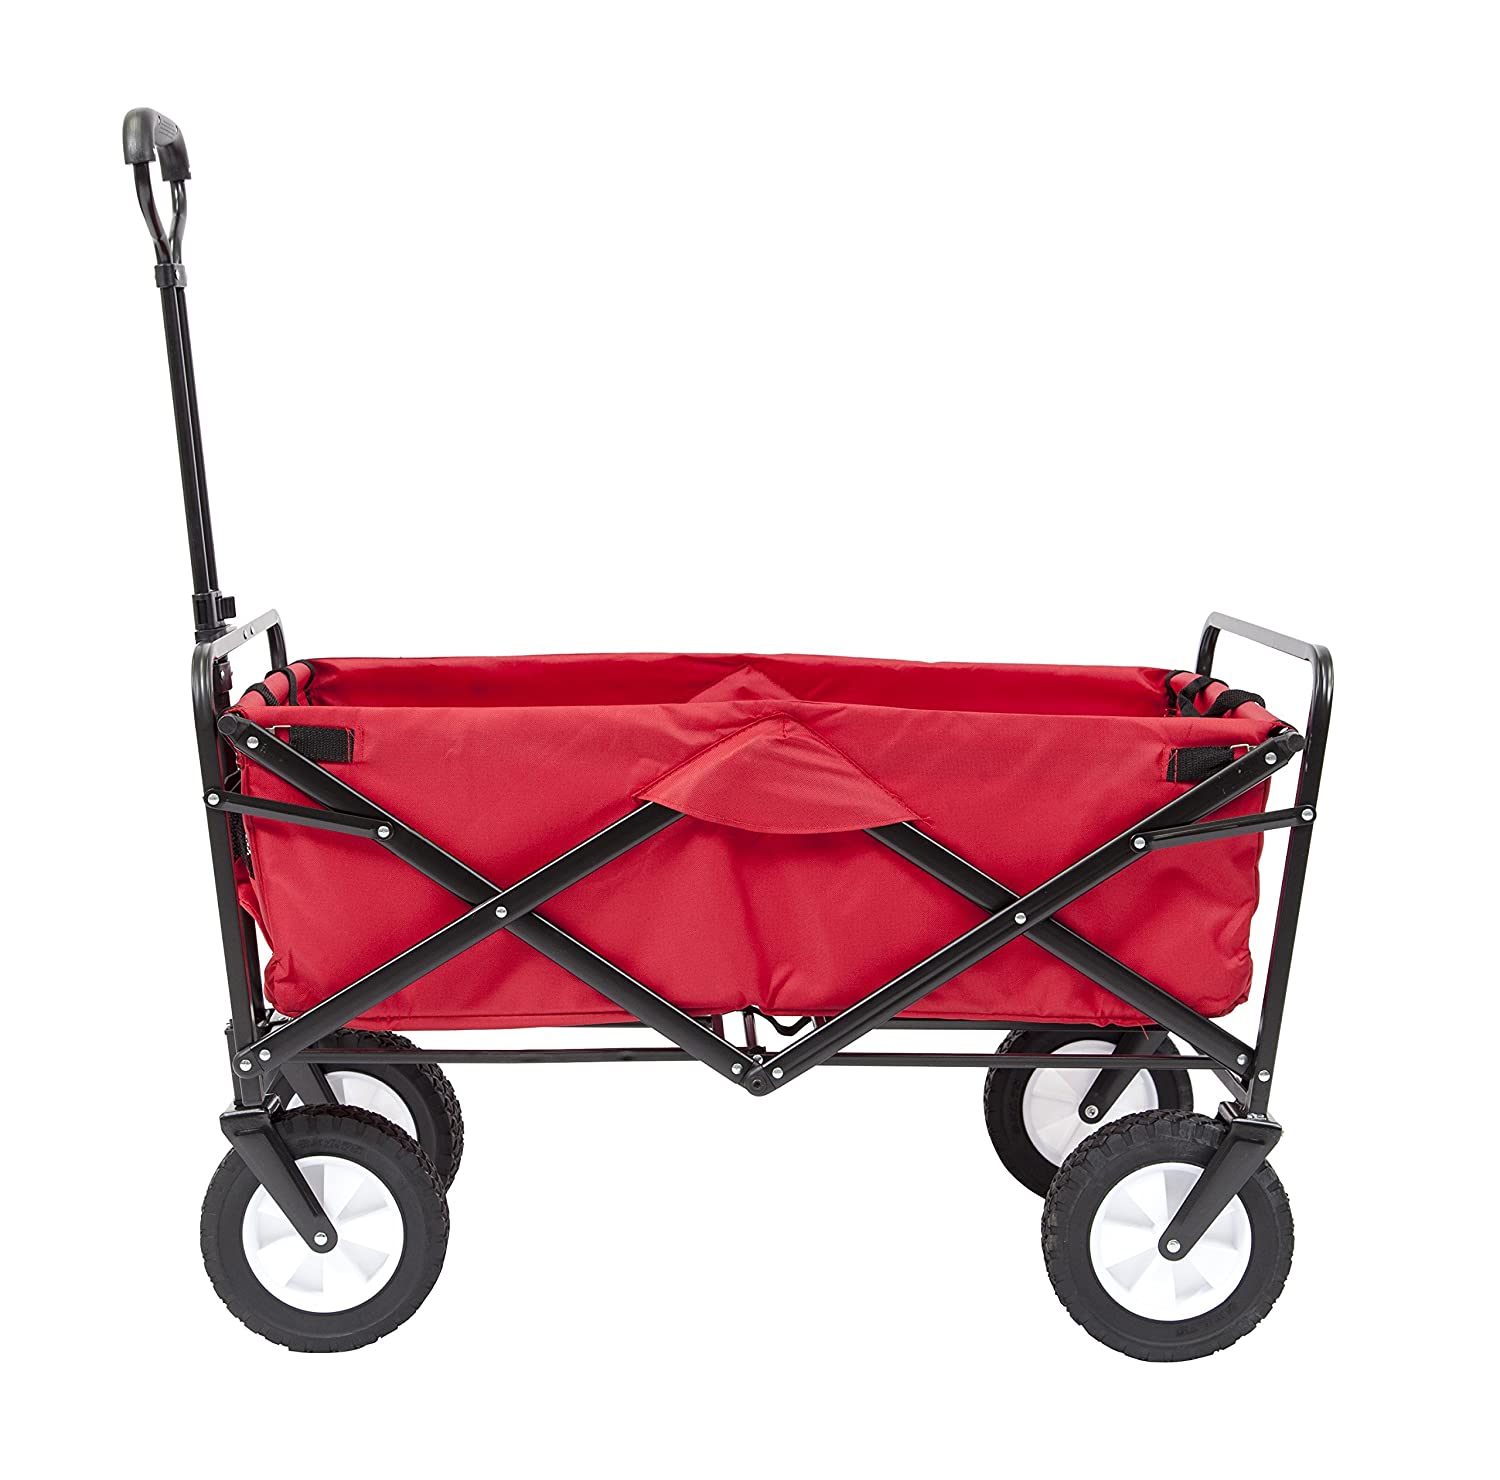 Top 10 Best Wagons for Kids Reviews in 2023 7